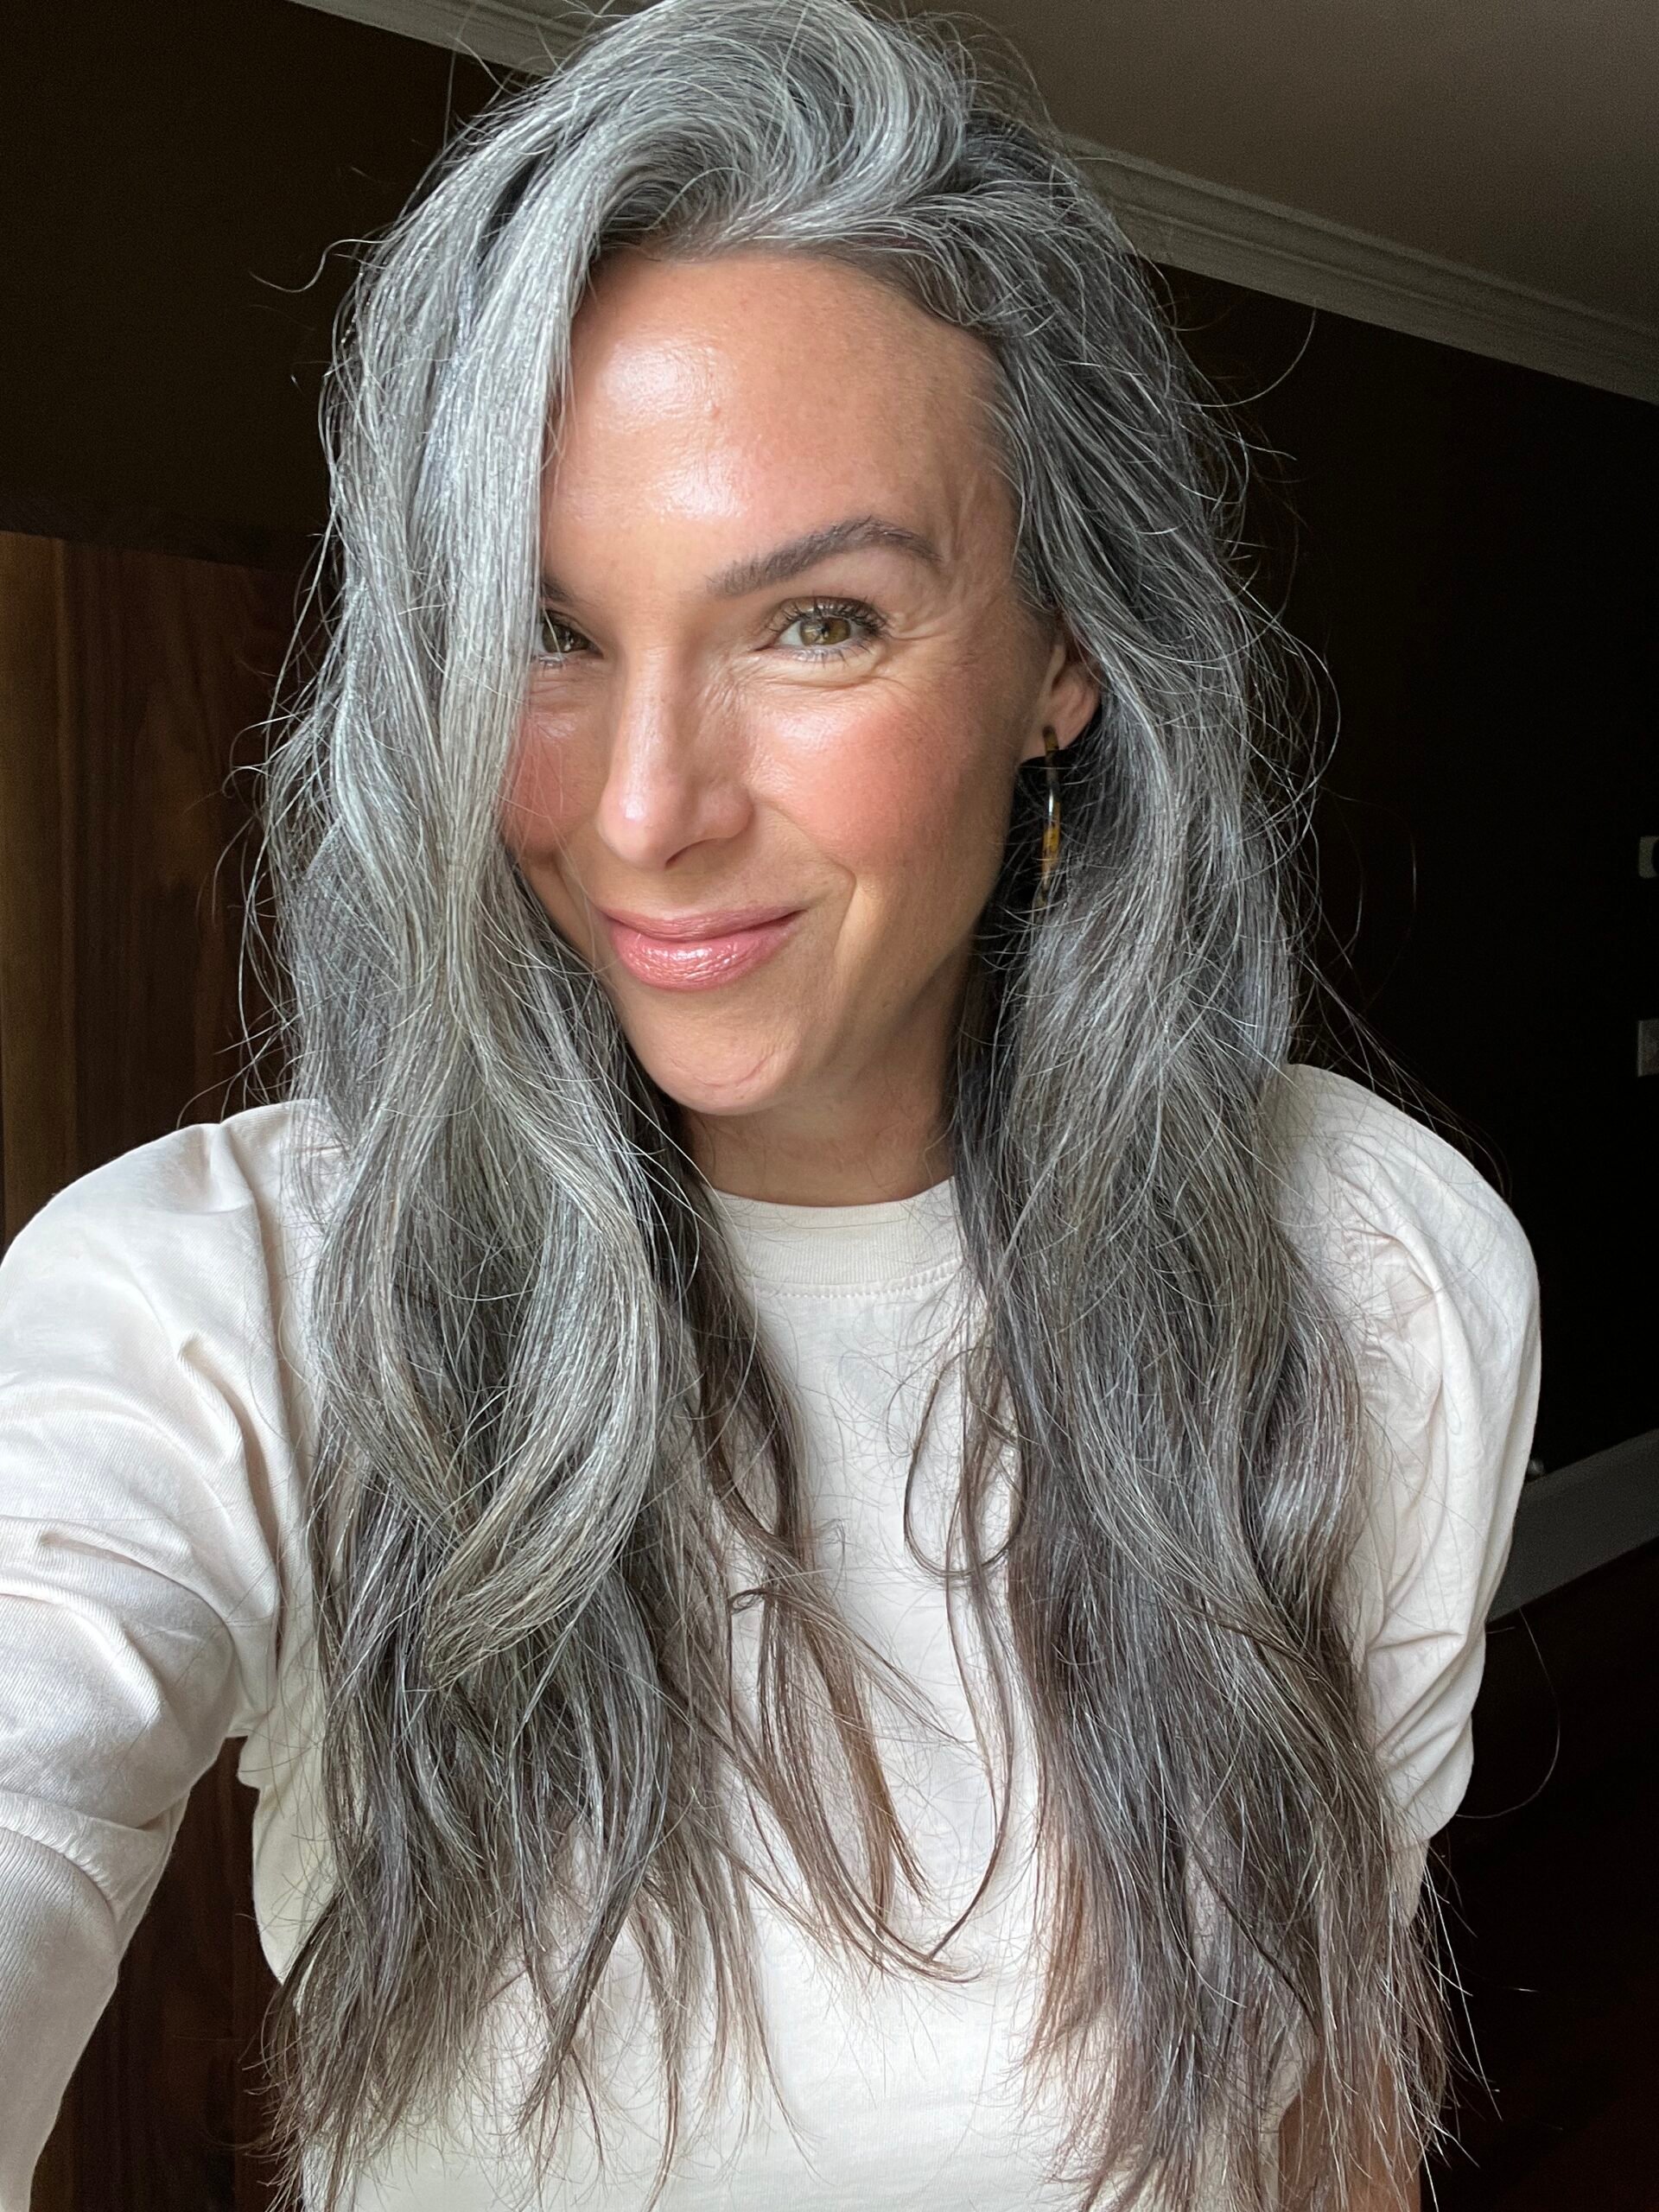 A woman with long wavy gray hair in a white top